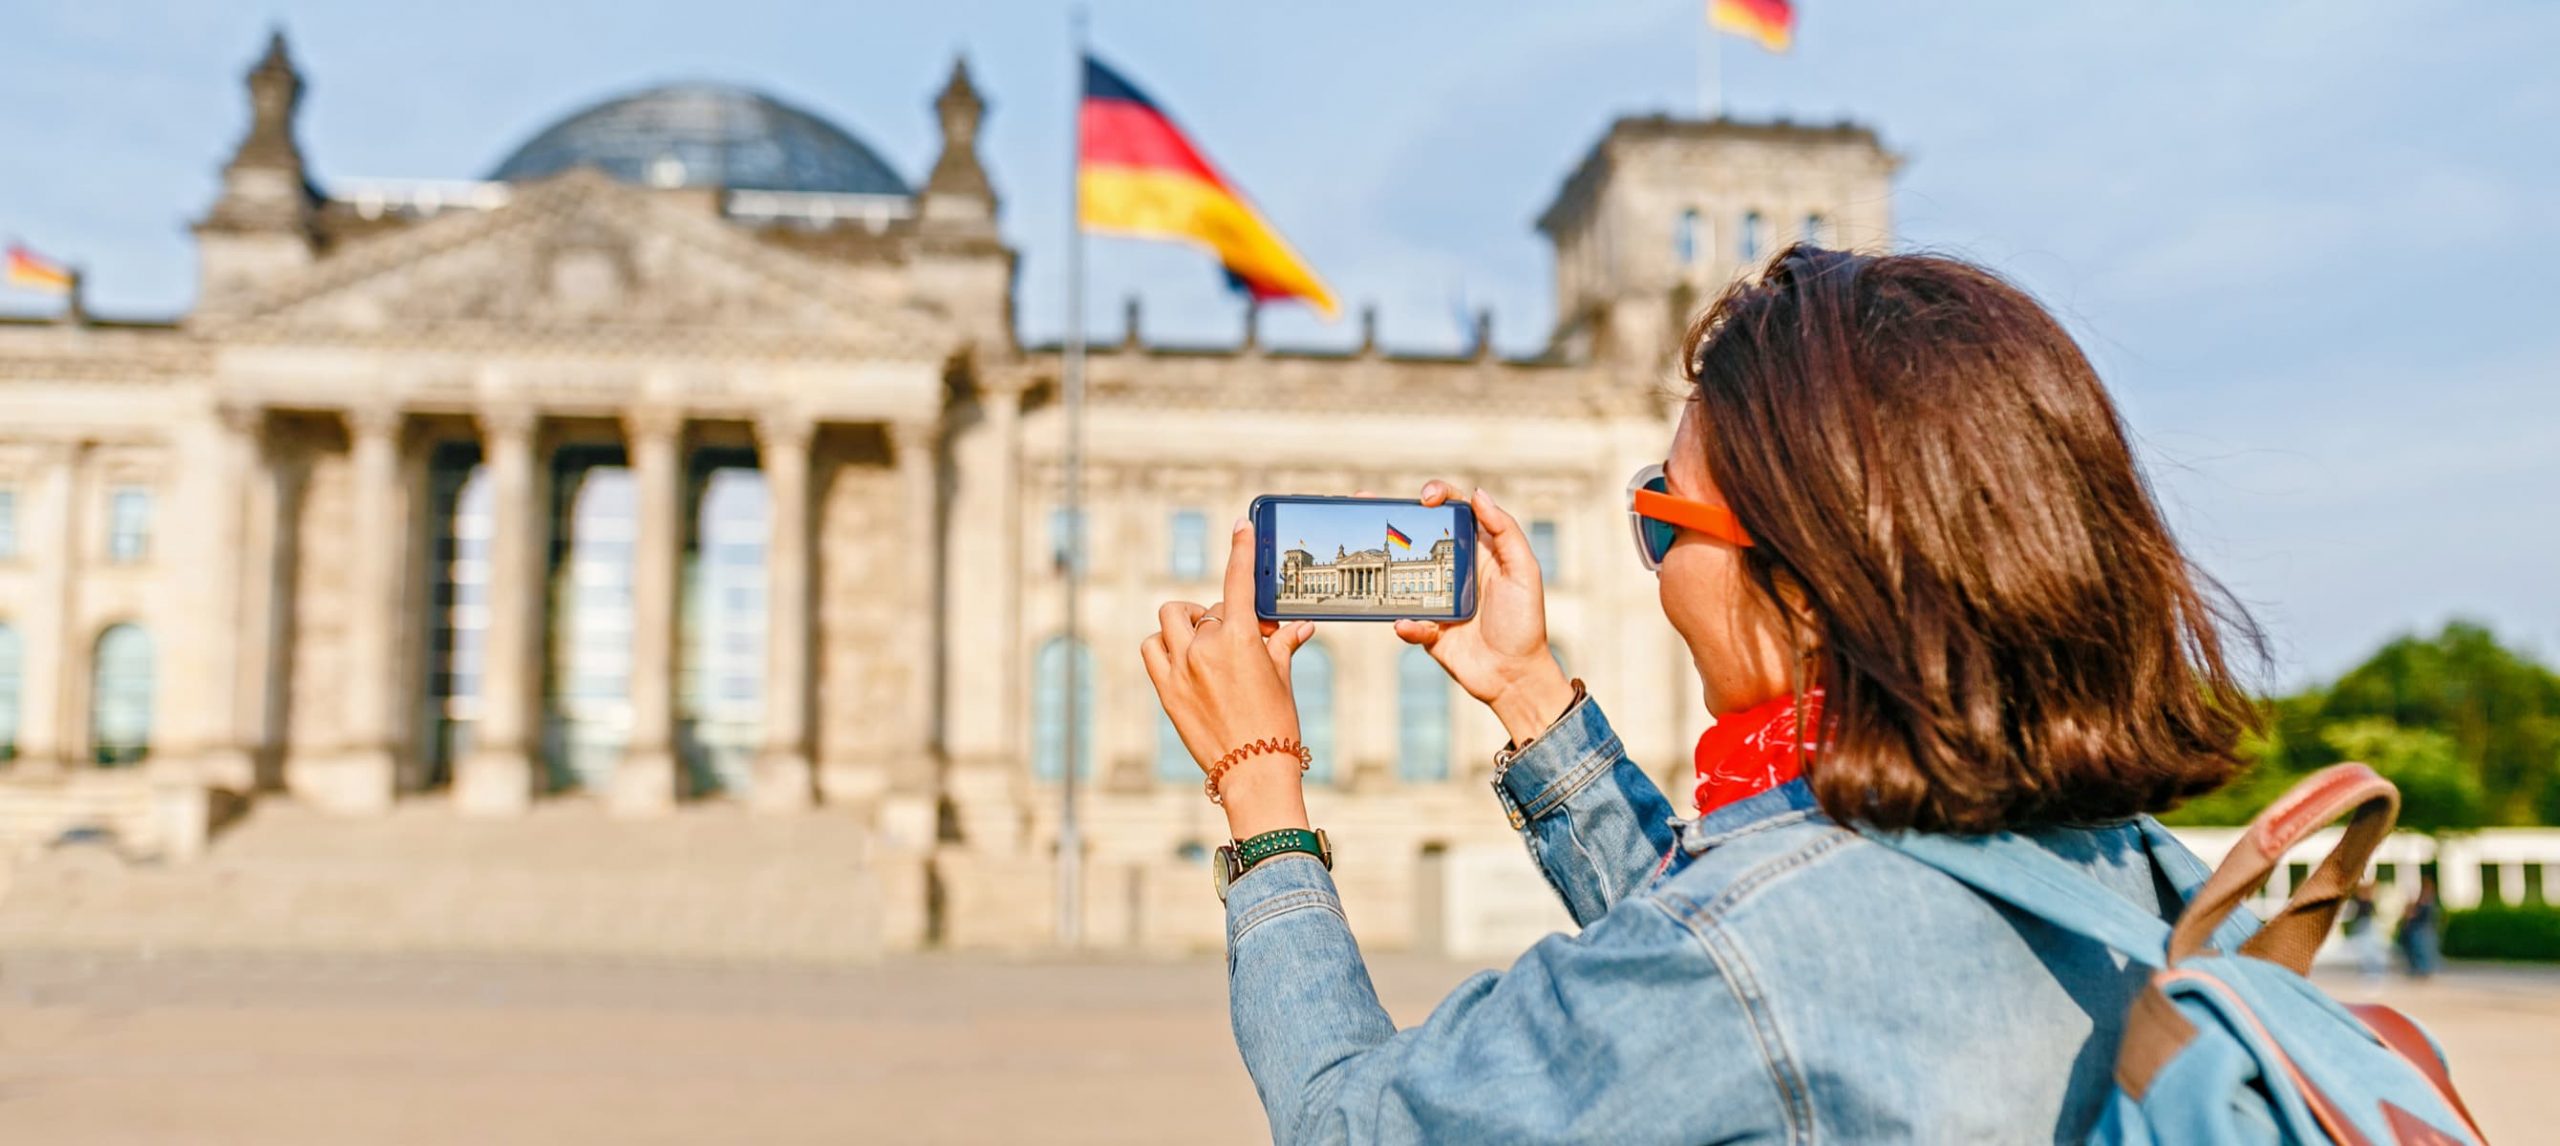 A female traveler taking a photo of Band des Bundes in Berlin